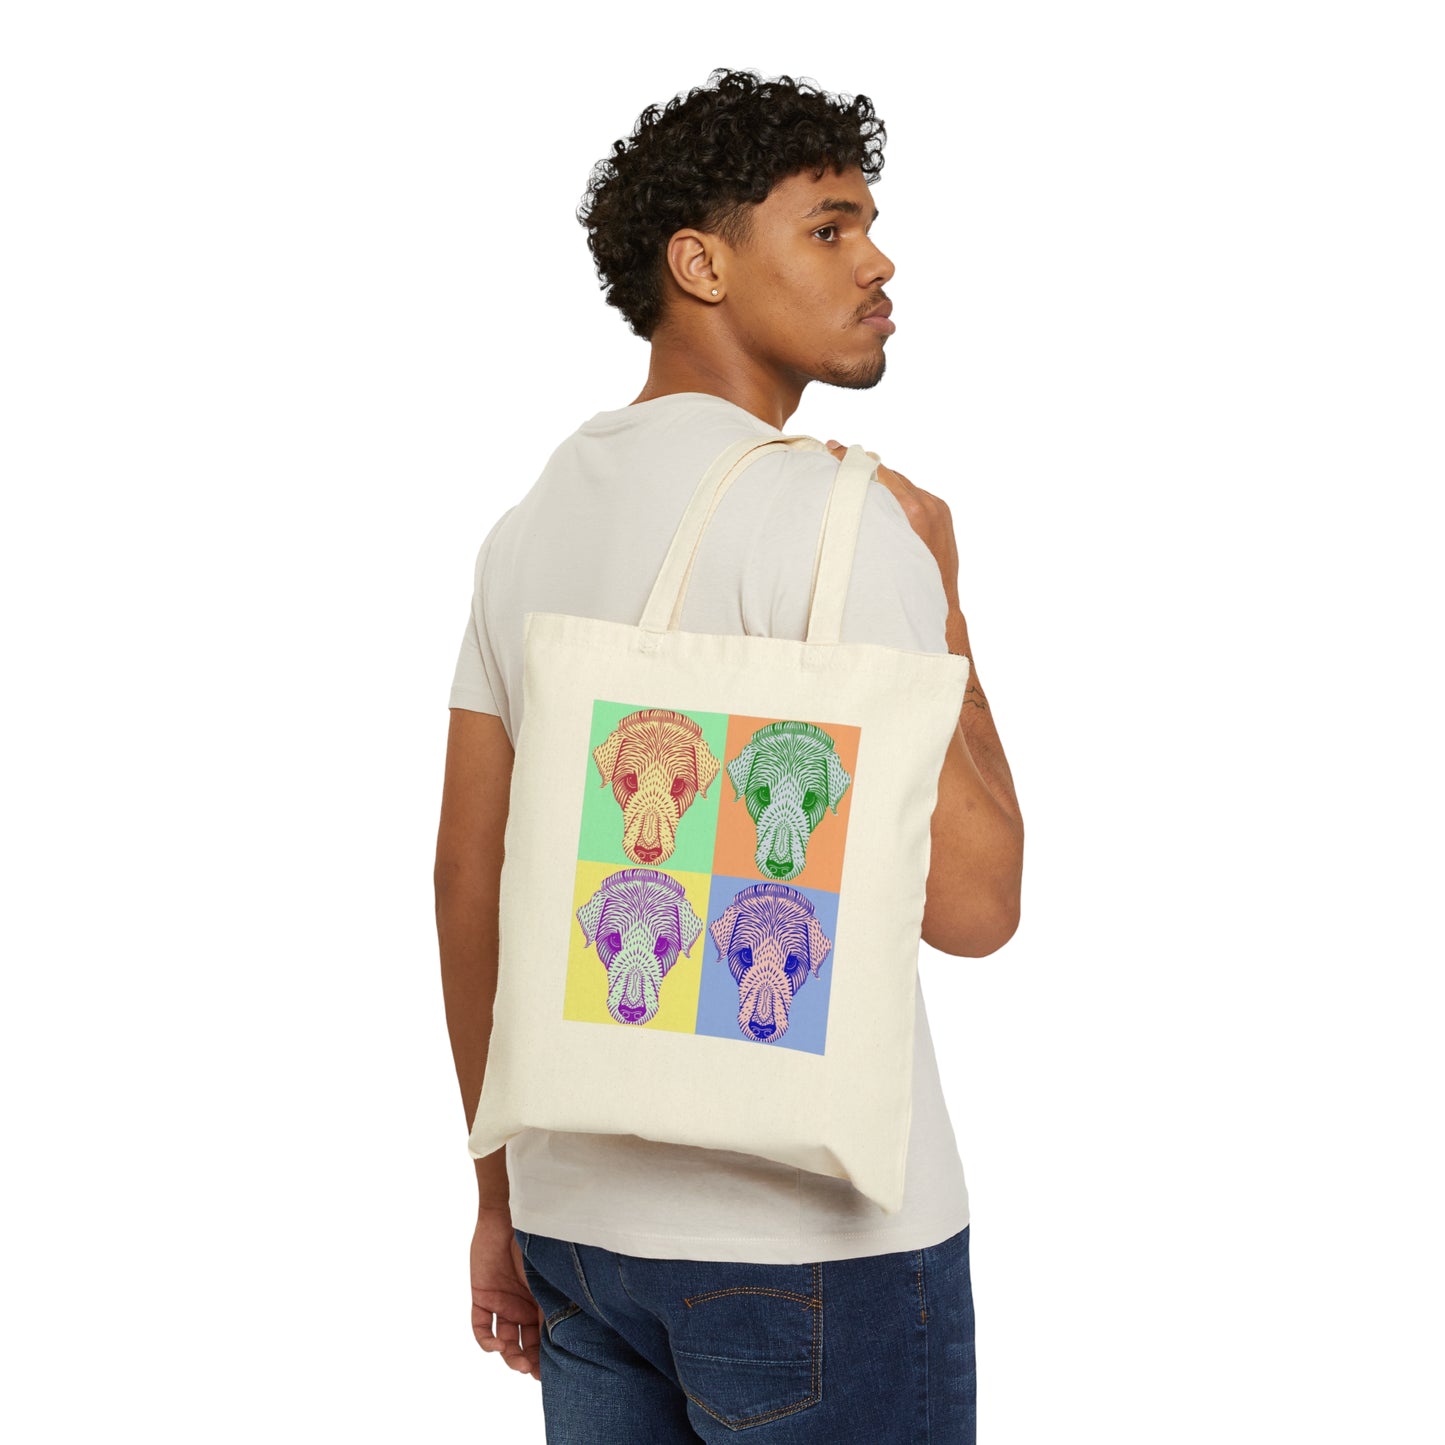 Four Dogs - Canvas Tote Bag